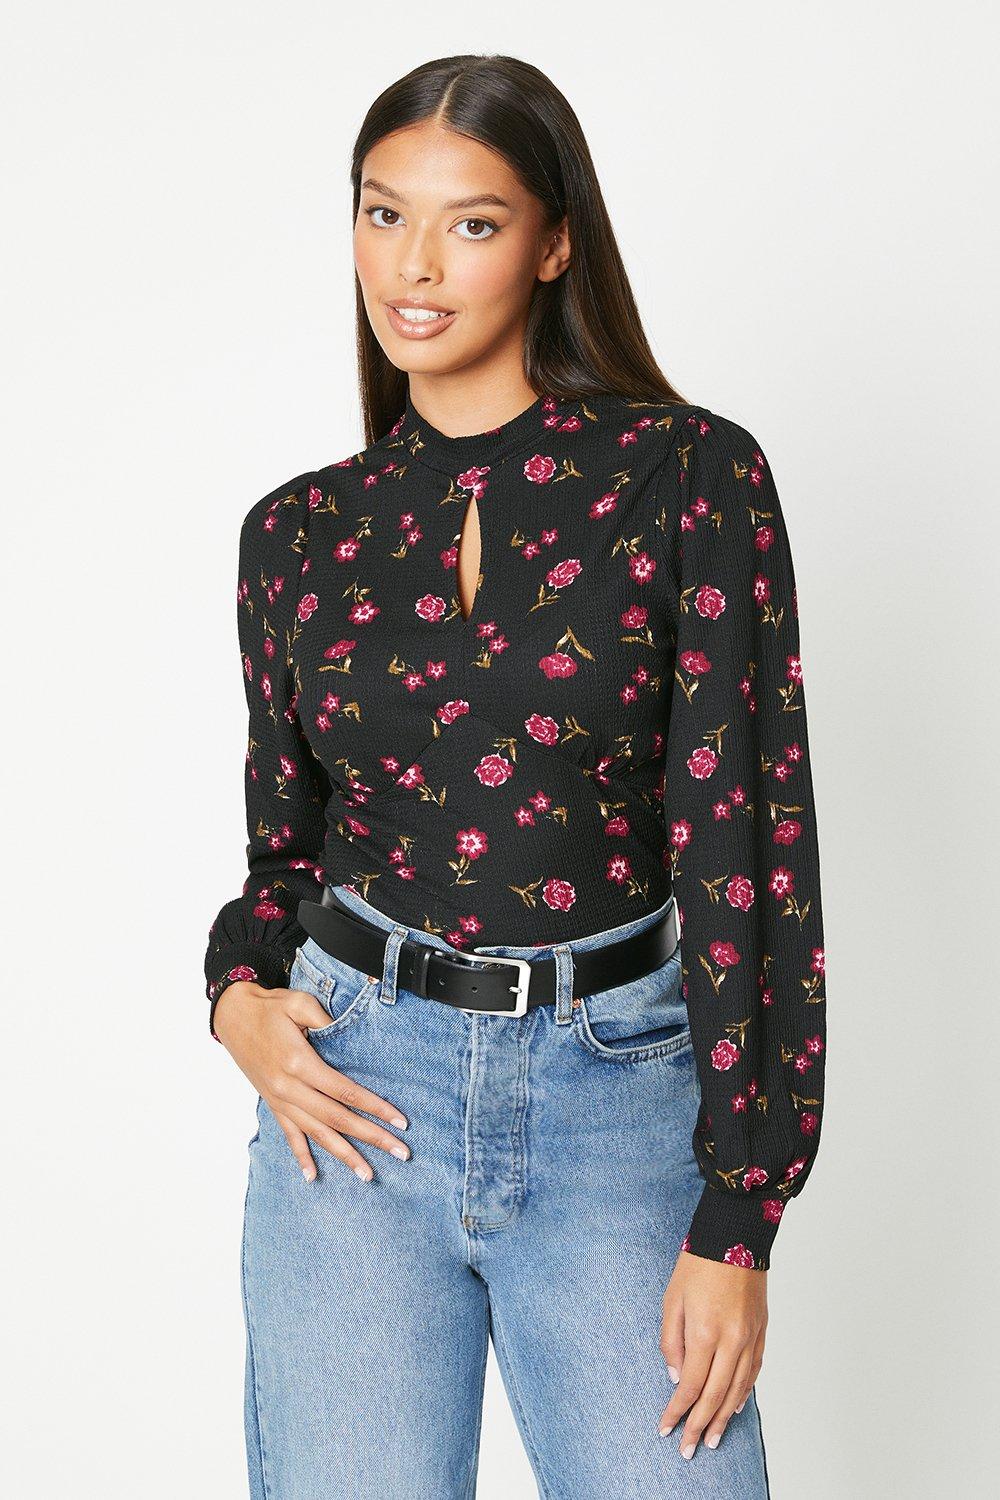 Women's Red Floral Keyhole Detail Long Sleeve Top - black - XL